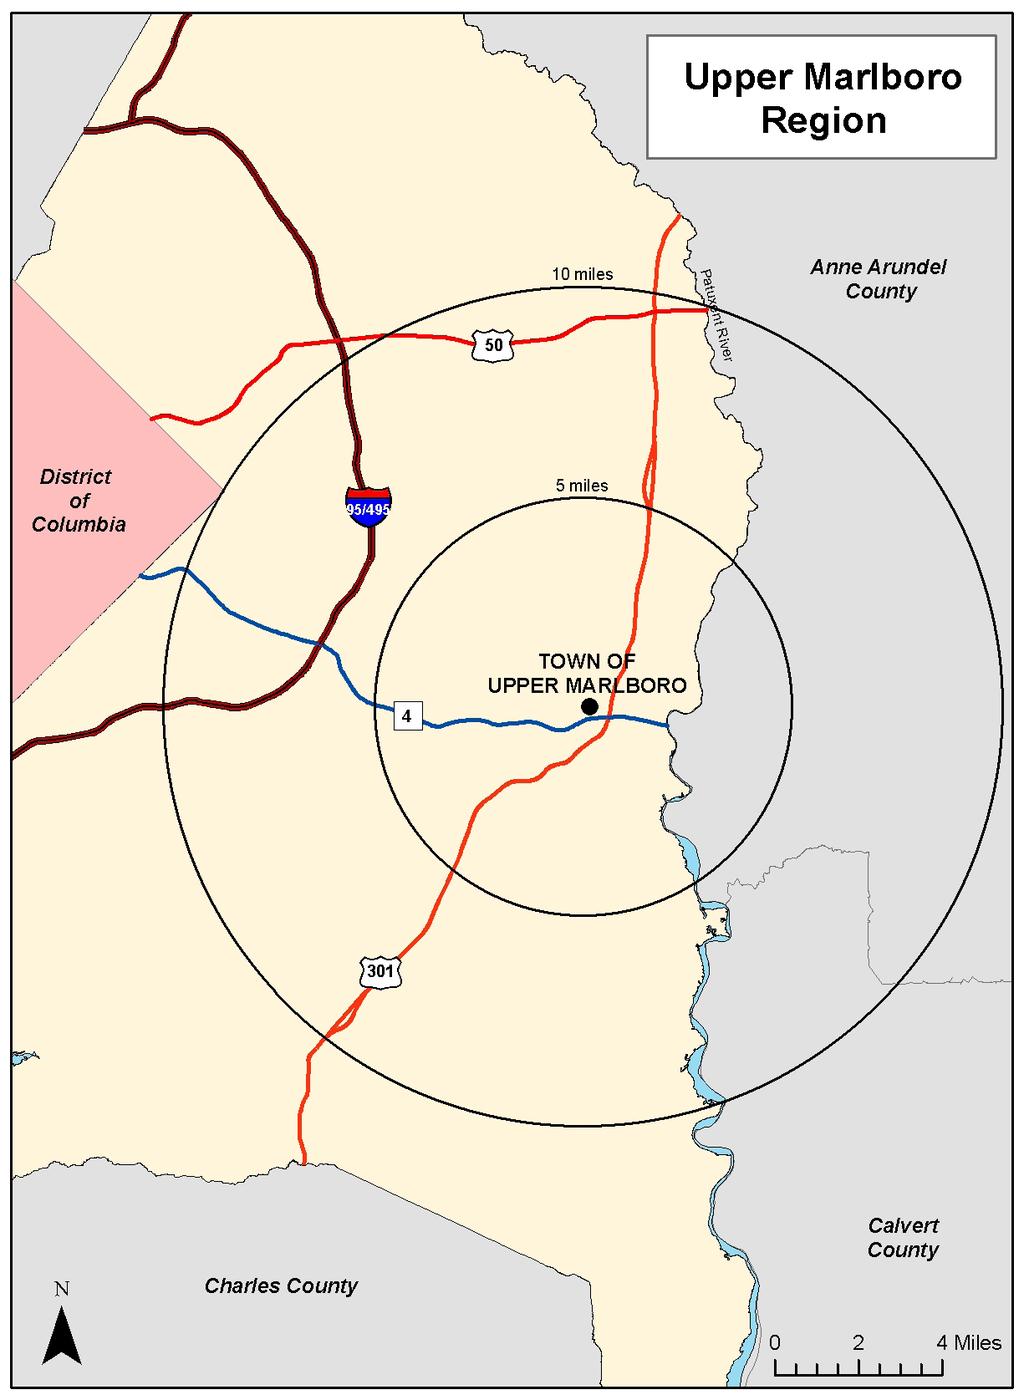 The Town of Upper Marlboro is located only 15 miles southeast of the District of Columbia, in the central portion of Prince George s County in the Subregion VI planning area.